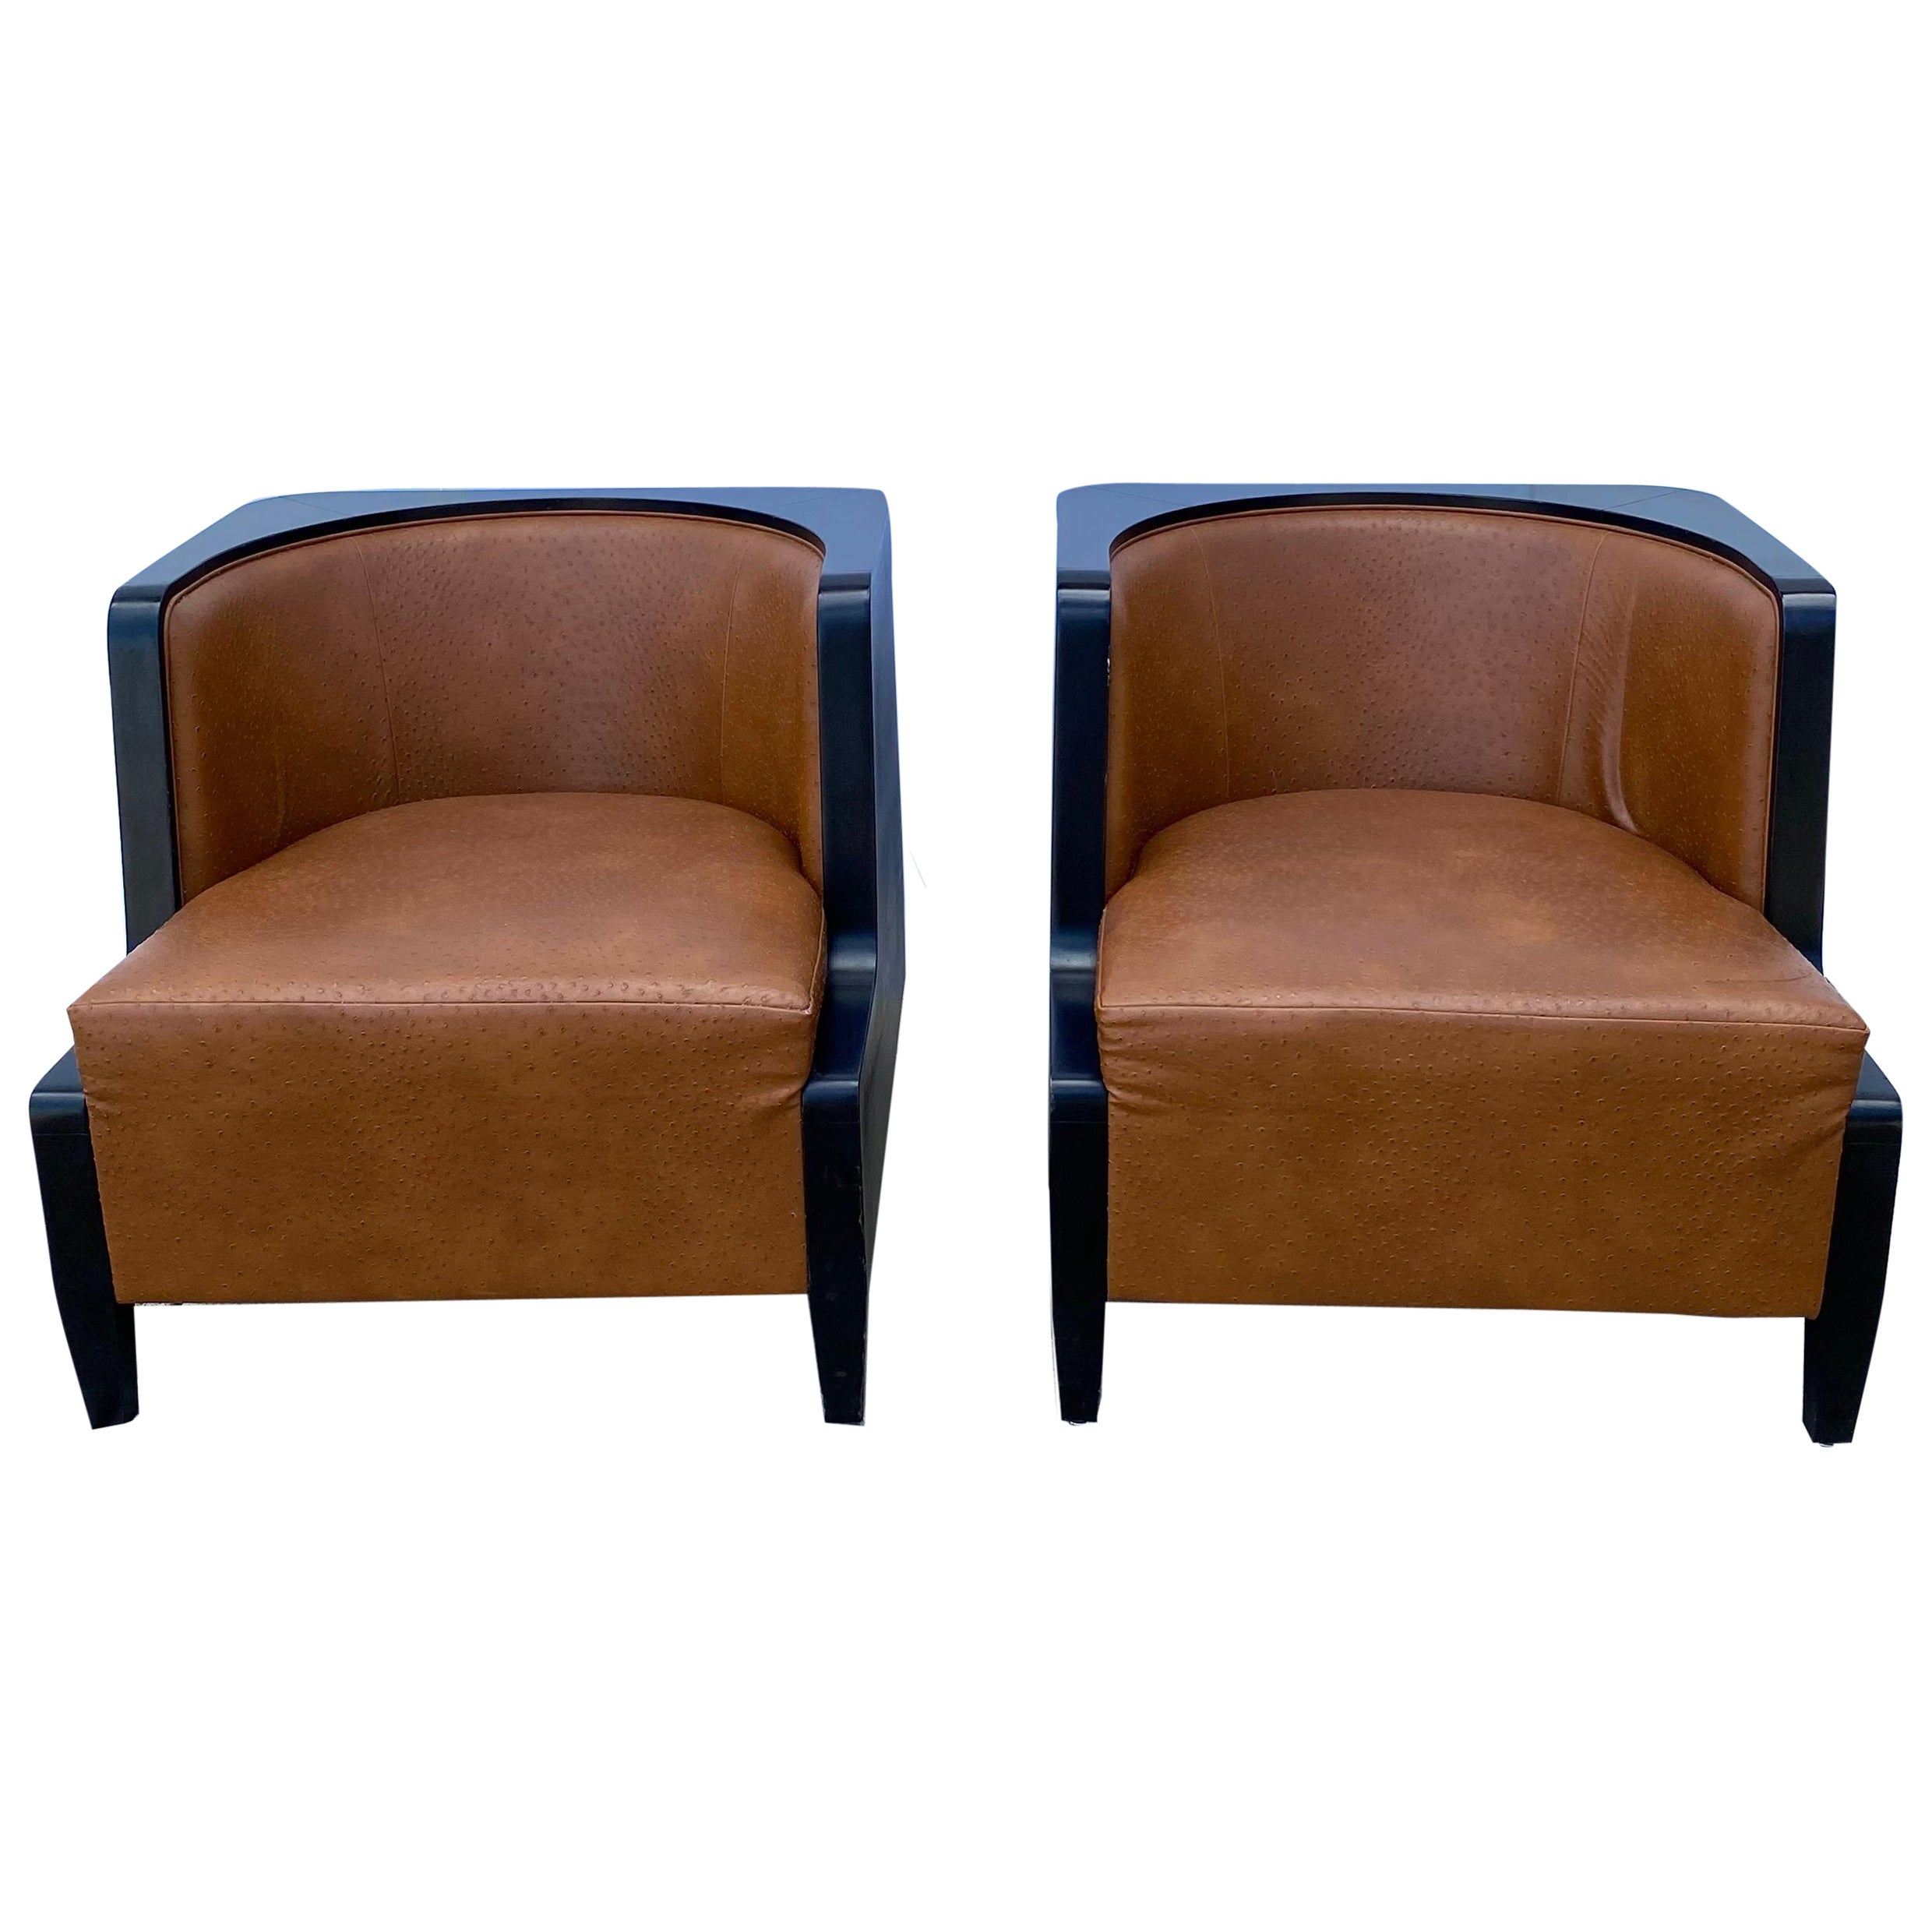 Pair of Art Deco style lounge chairs in black lacquer and cognac leather with ostrich markings. Manufactured by Rosello Paris, producers of art deco styled furniture since 1928.